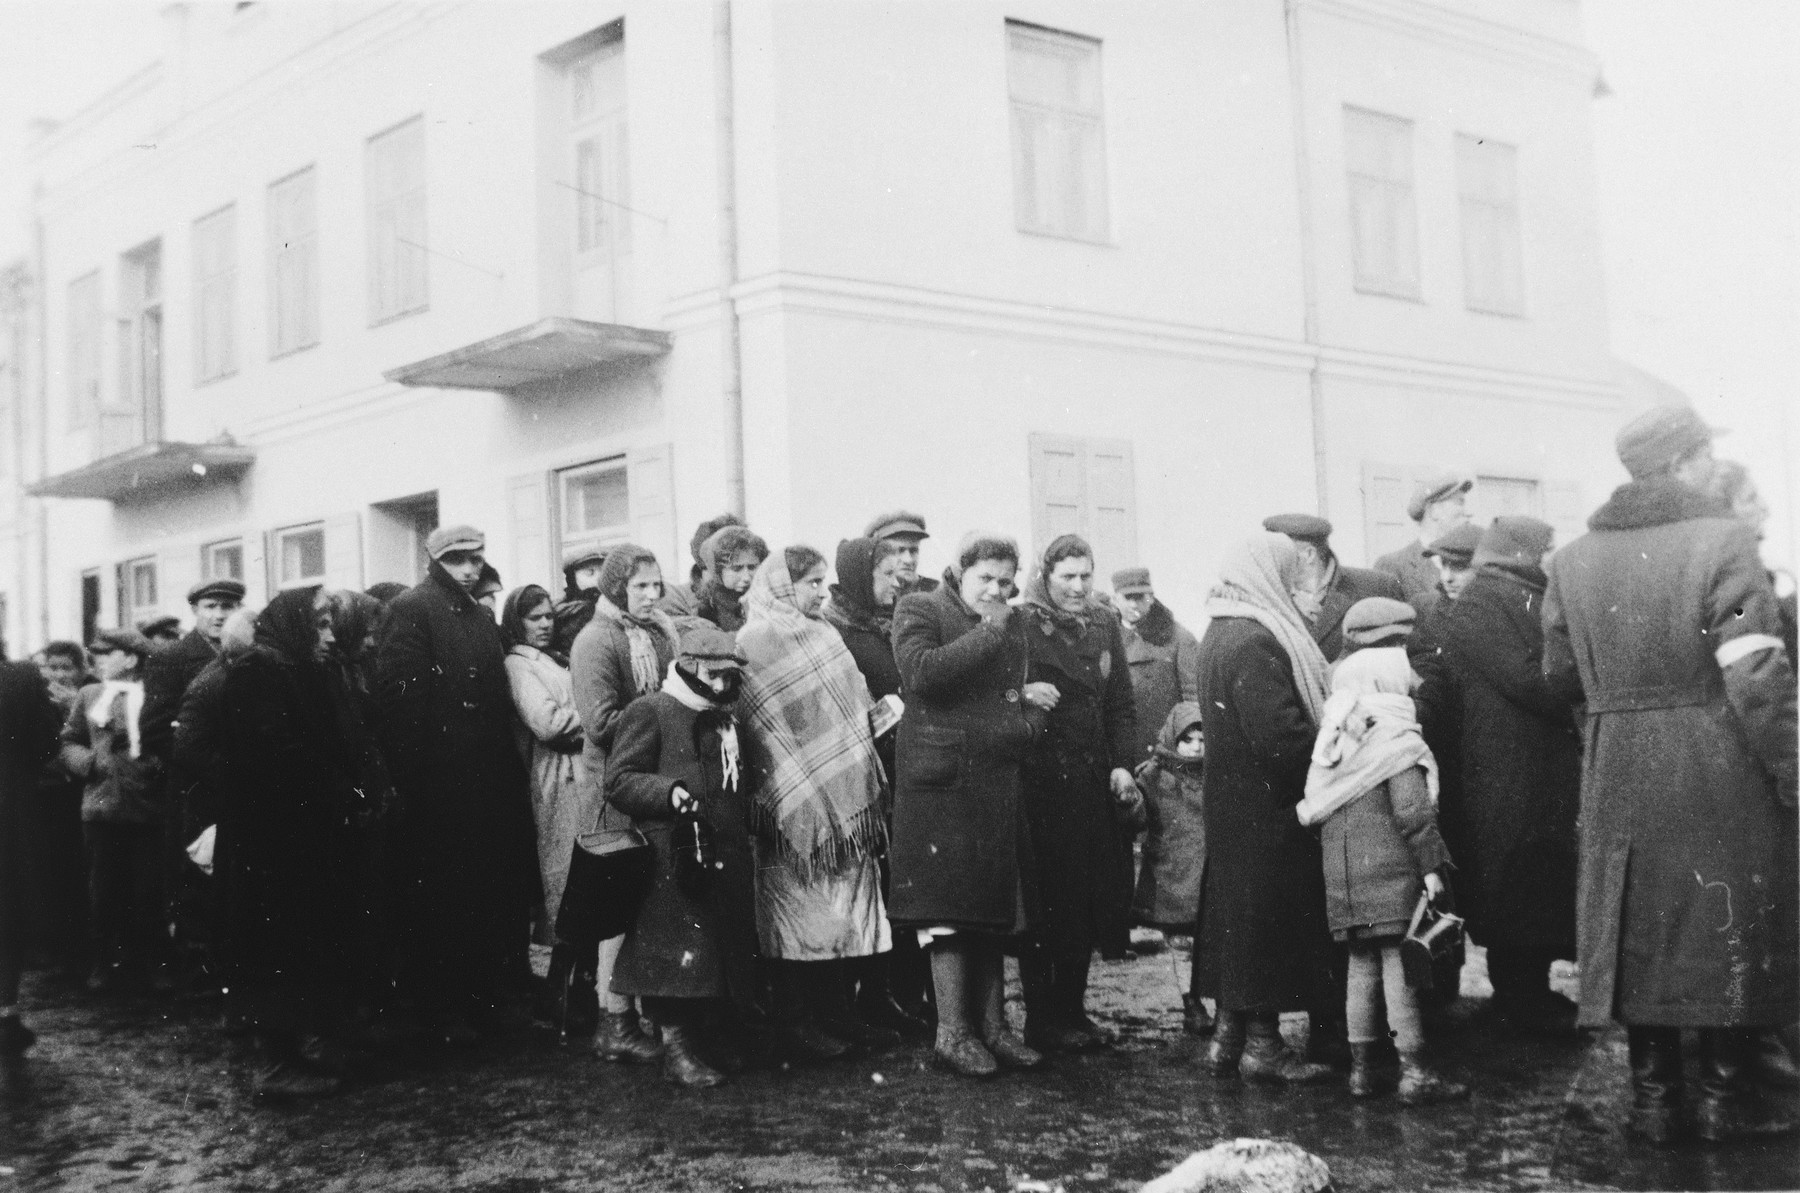 Jews who have been expelled from the town of Plock, wait on a street to be resettled in Chmielnik.